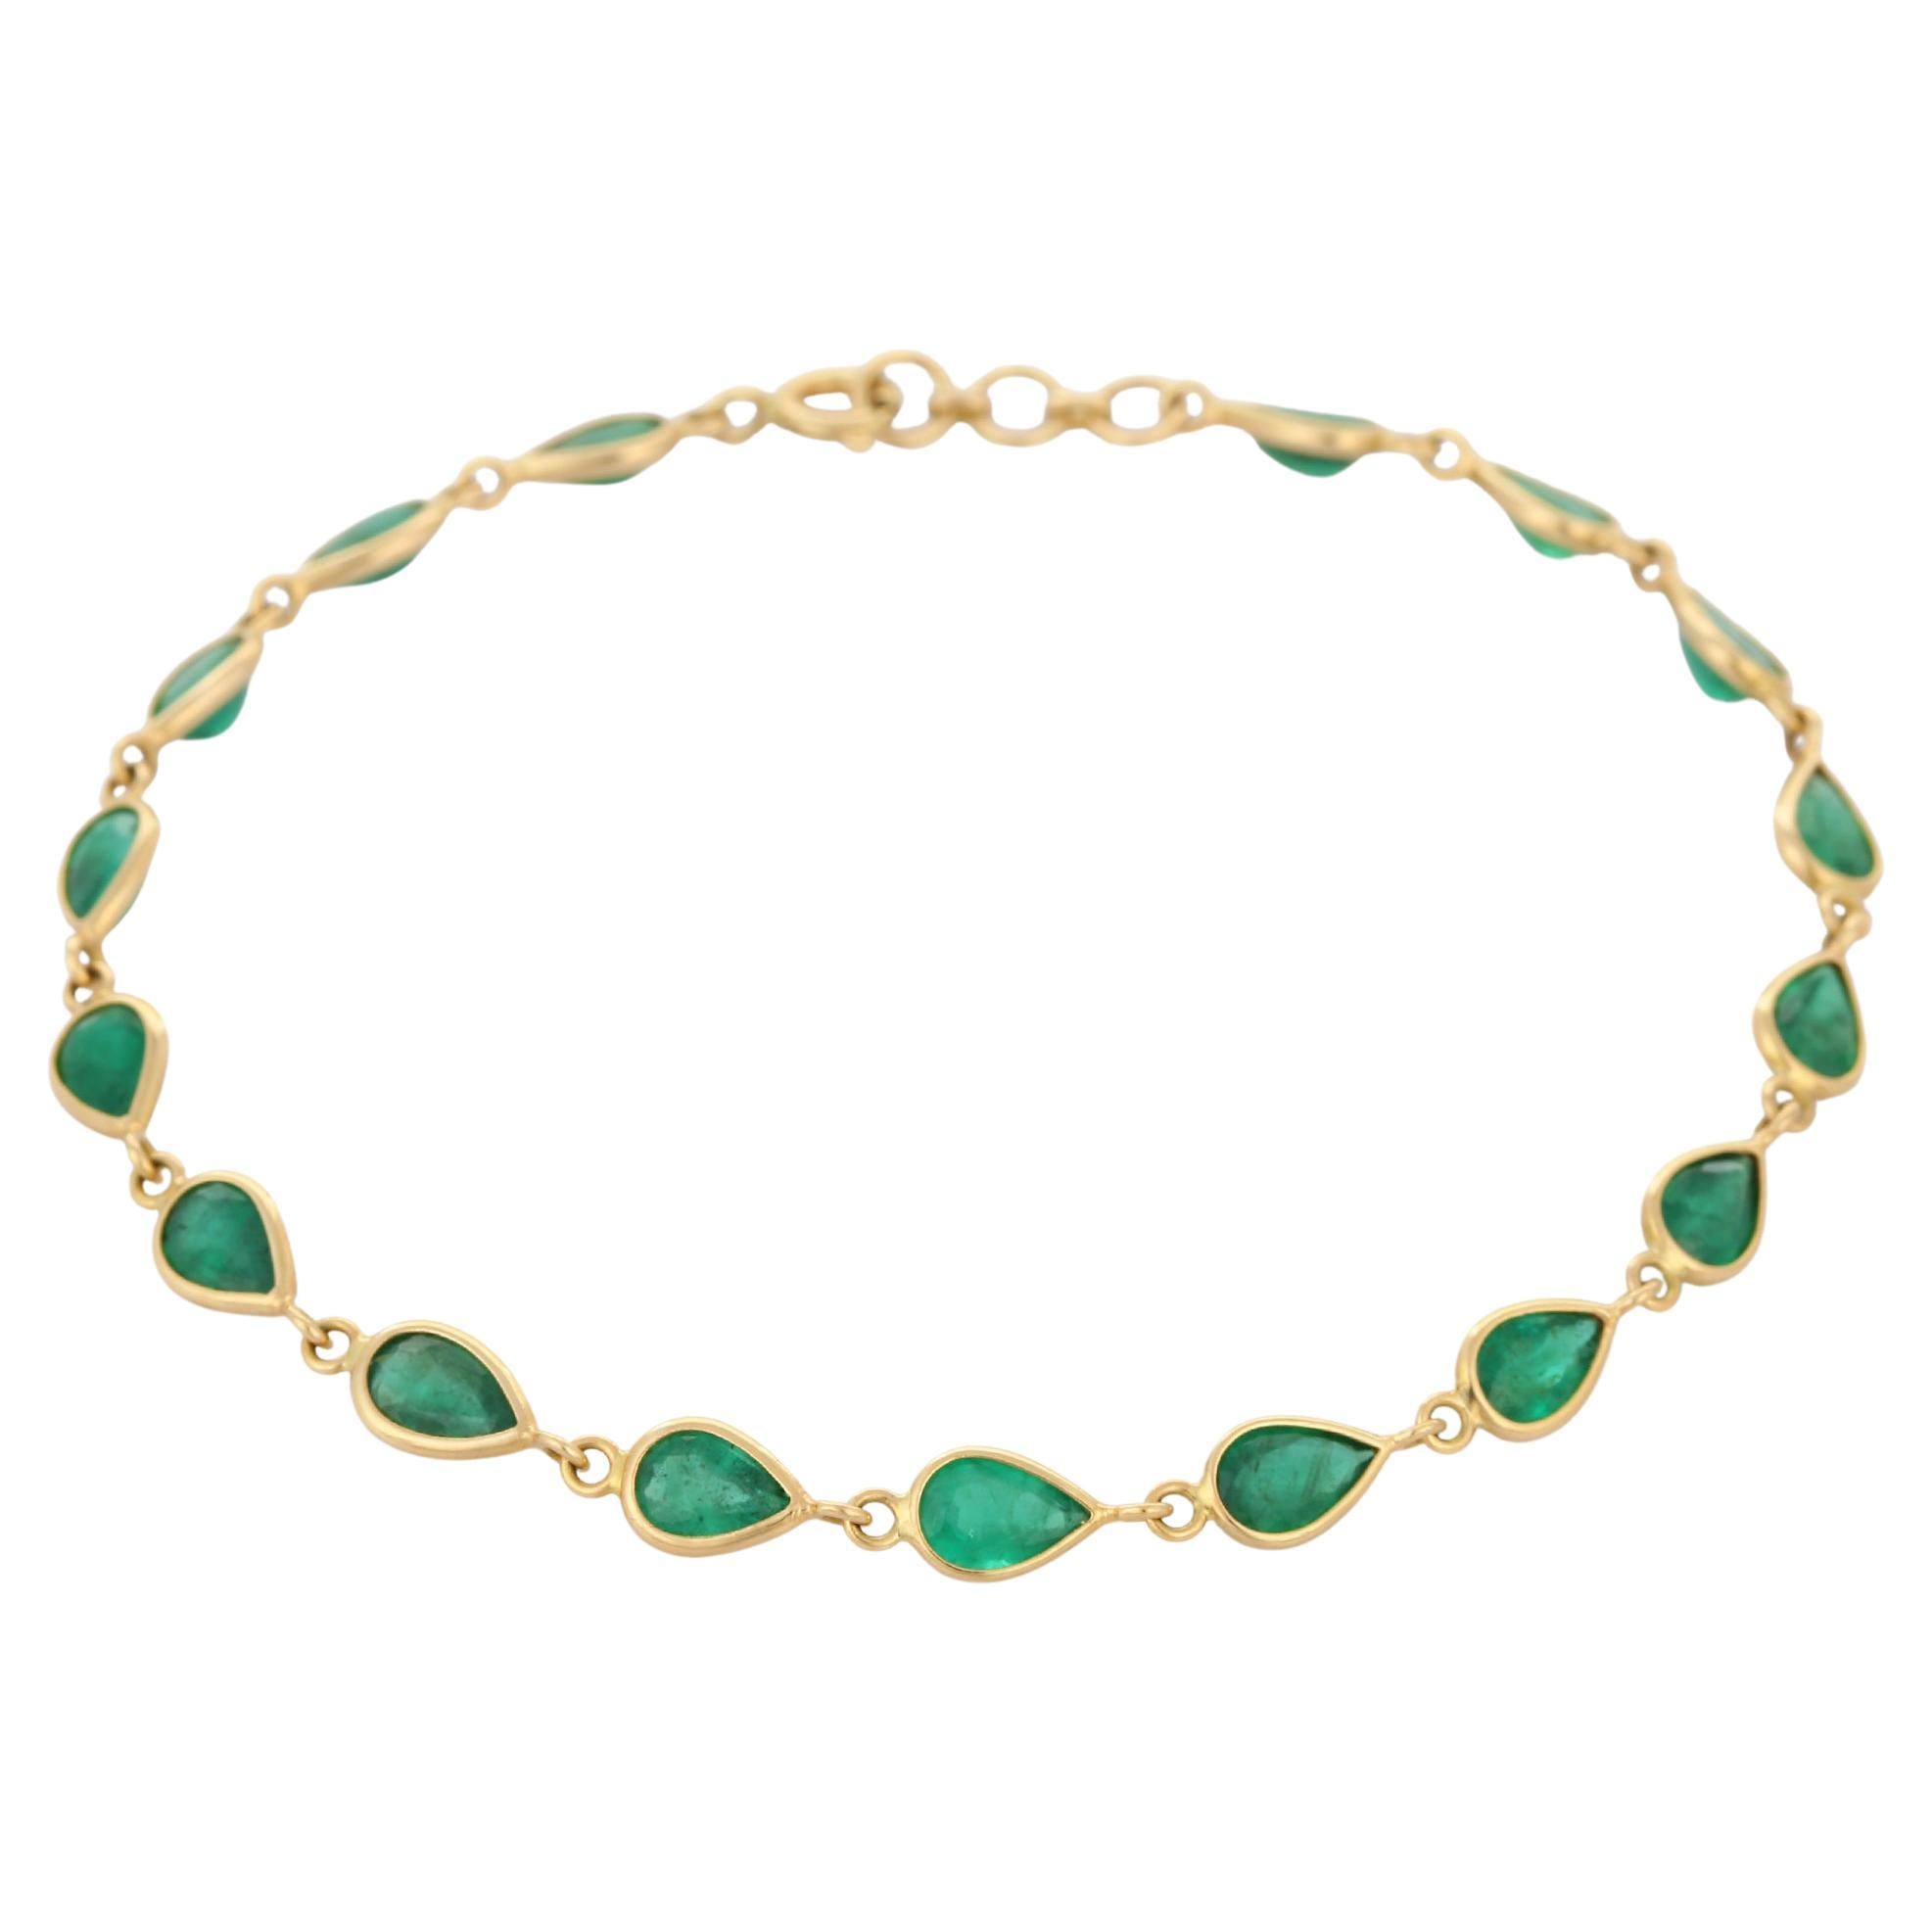 Exquisite 5.75 ct Pear Cut Emerald Chain Bracelet Inlaid in 18K Yellow Gold For Sale